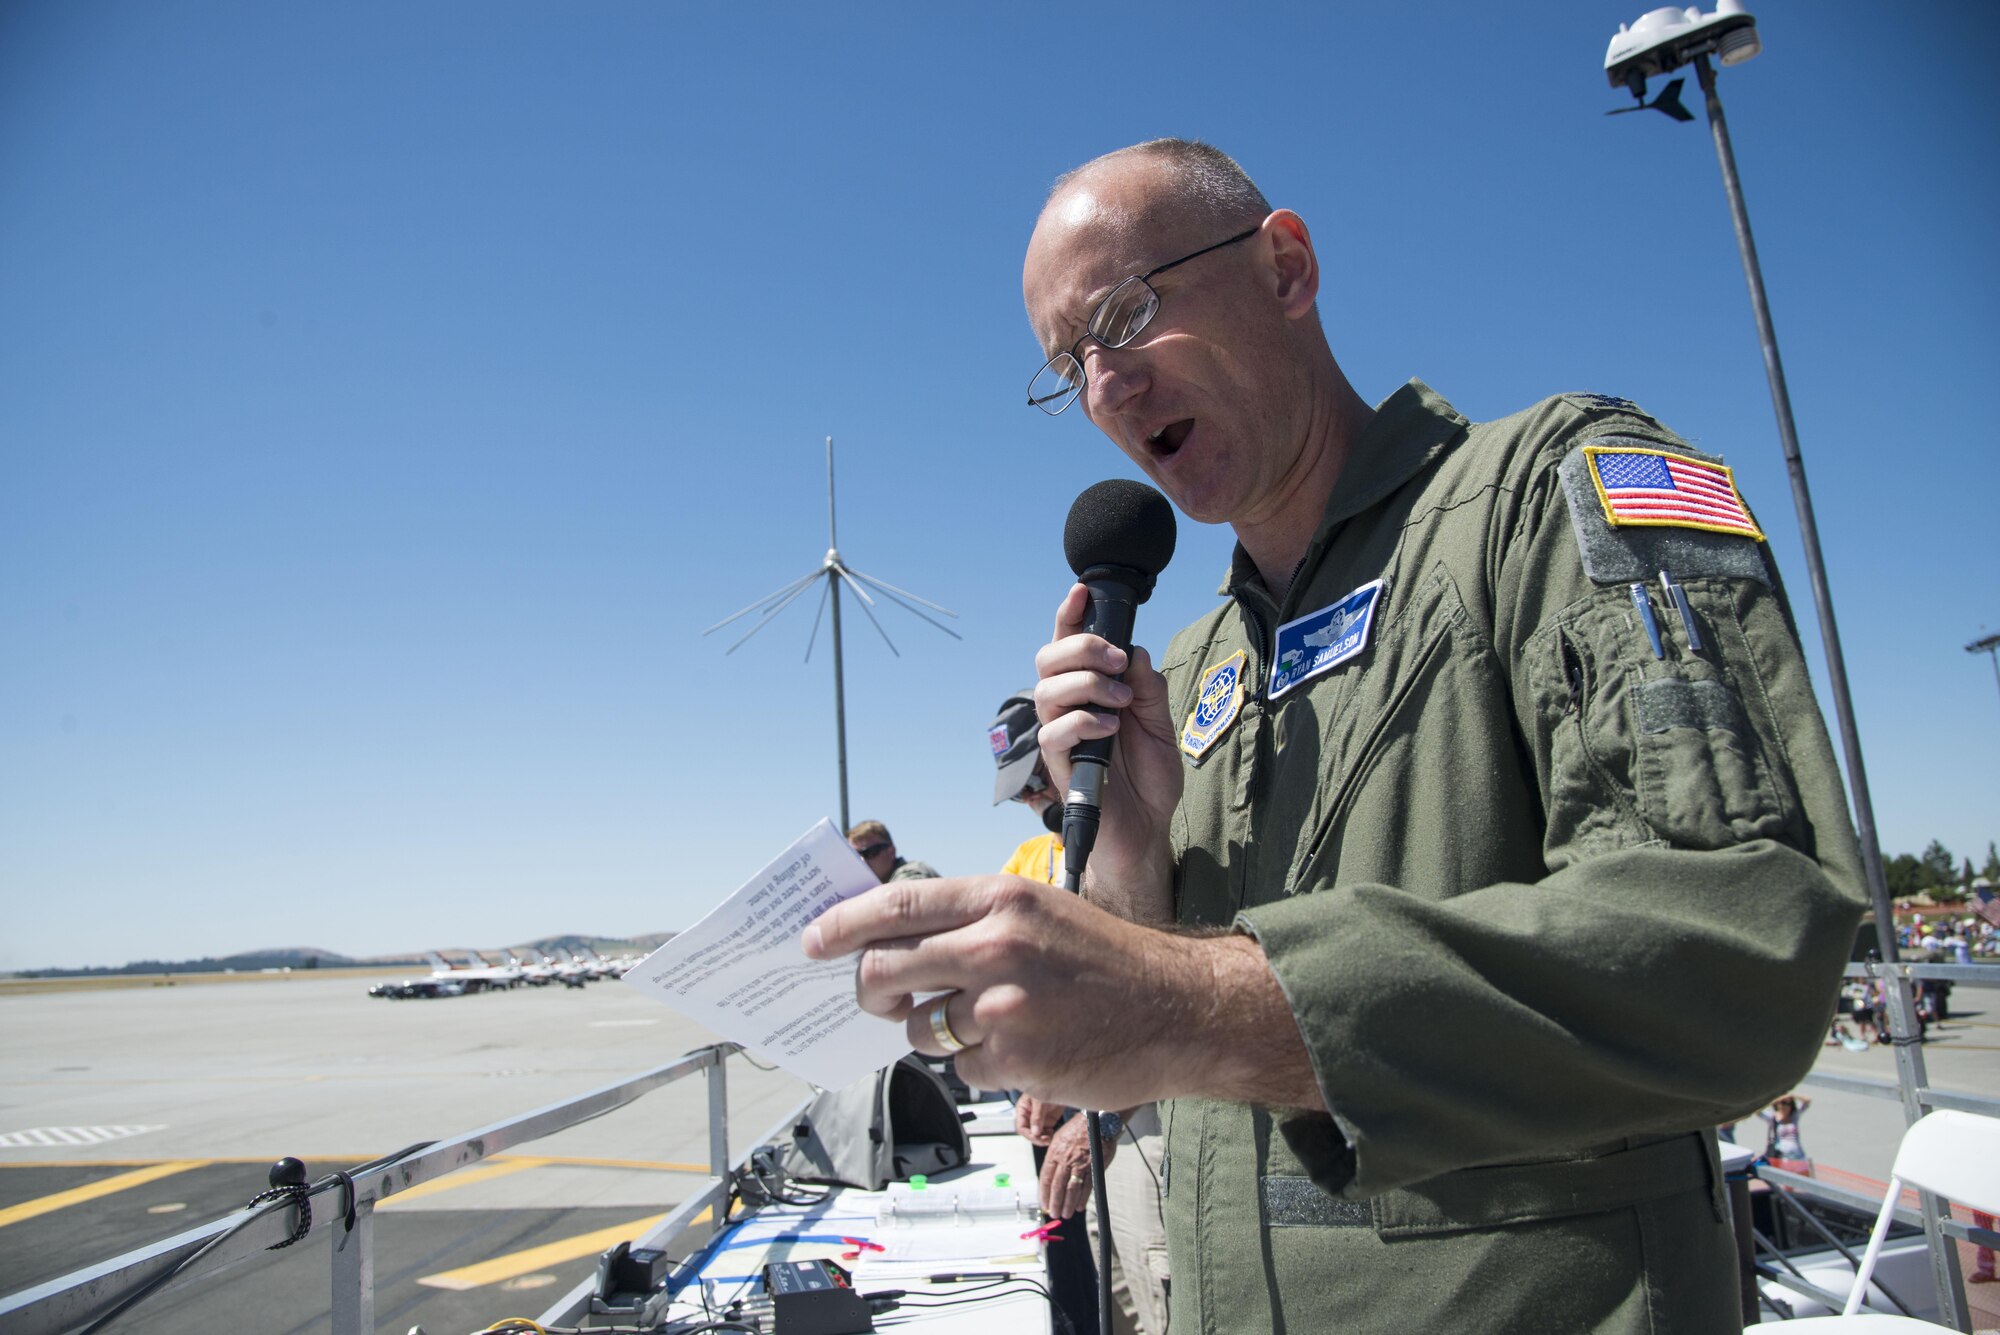 Col. Ryan Samuelson, 92nd Air Refueling Wing commander, thanked service members and members of the local community for their support during the SkyFest 2017 Air Show and Open House at Fairchild Air Force Base, Washington. SkyFest was hosted to thank the local and regional community for their support and give them the opportunity to meet Airmen and learn about the Air Force mission. (U.S. Air Force photo/Senior Airman Janelle Patiño)